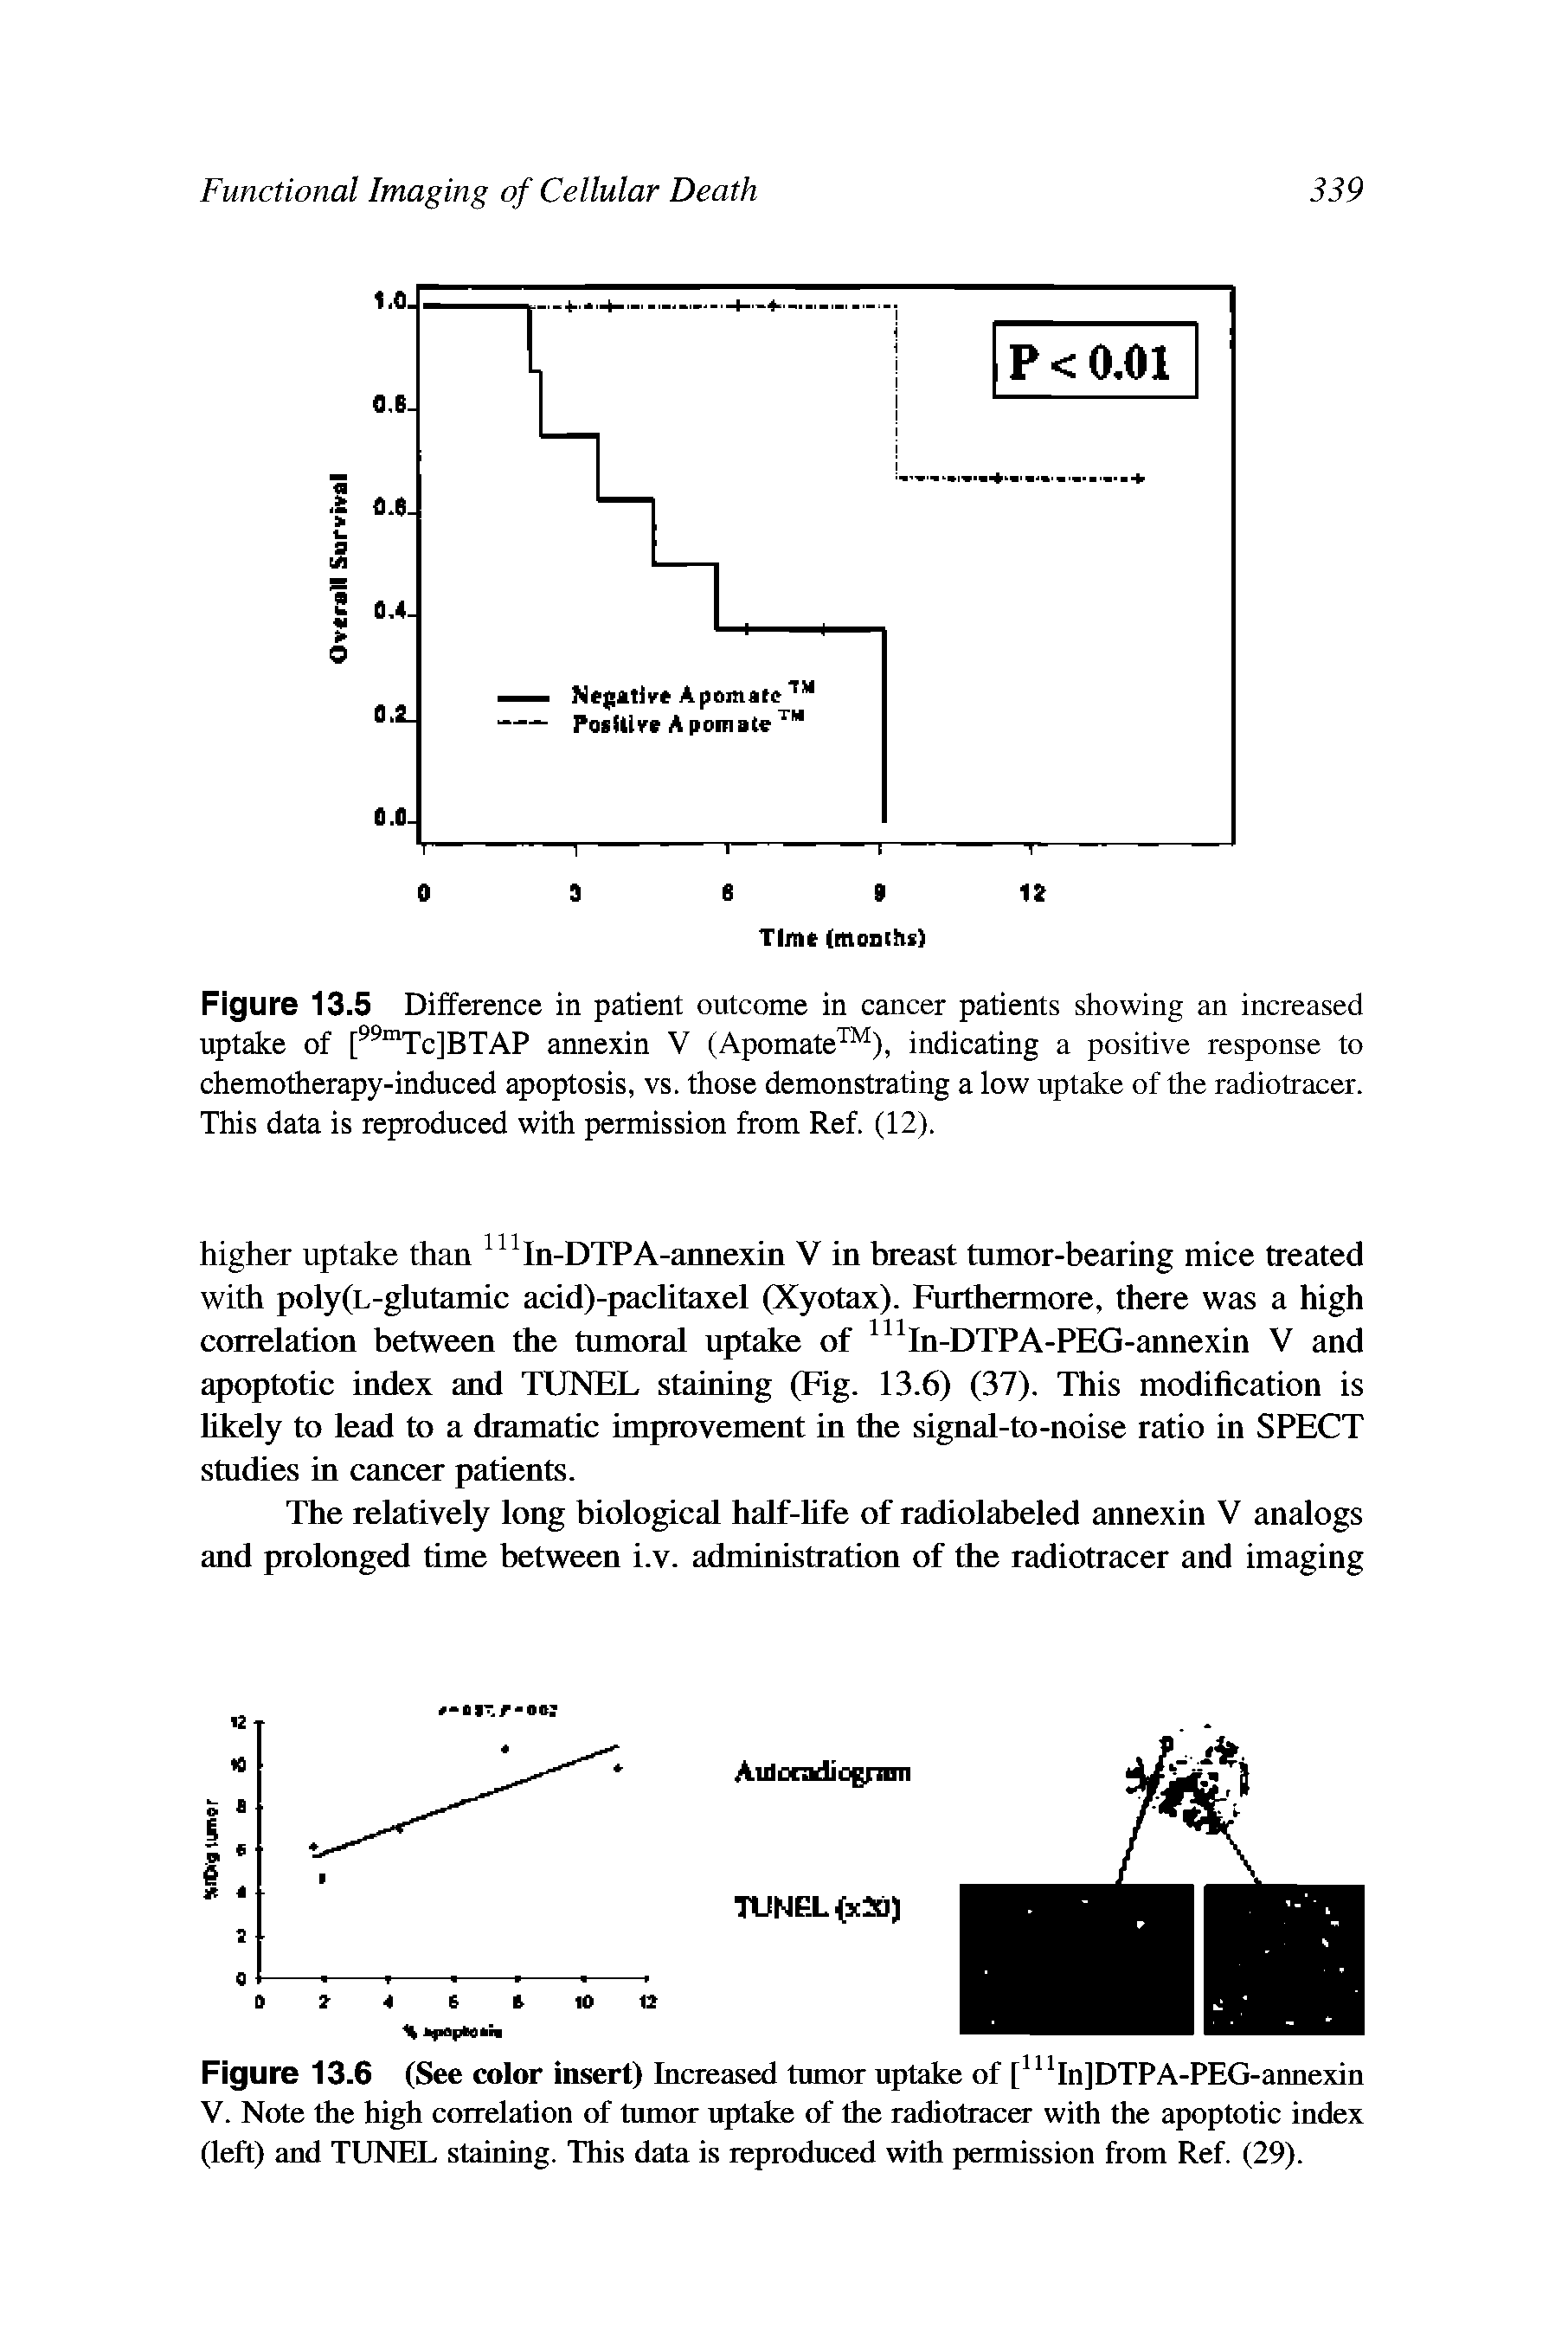 Figure 13.5 Difference in patient outcome in cancer patients showing an increased uptake of [ "TcJBTAP annexin V (Apomate ), indicating a positive response to chemotherapy-induced apoptosis, vs. those demonstrating a low uptake of the radiotracer. This data is reproduced with permission from Ref. (12).